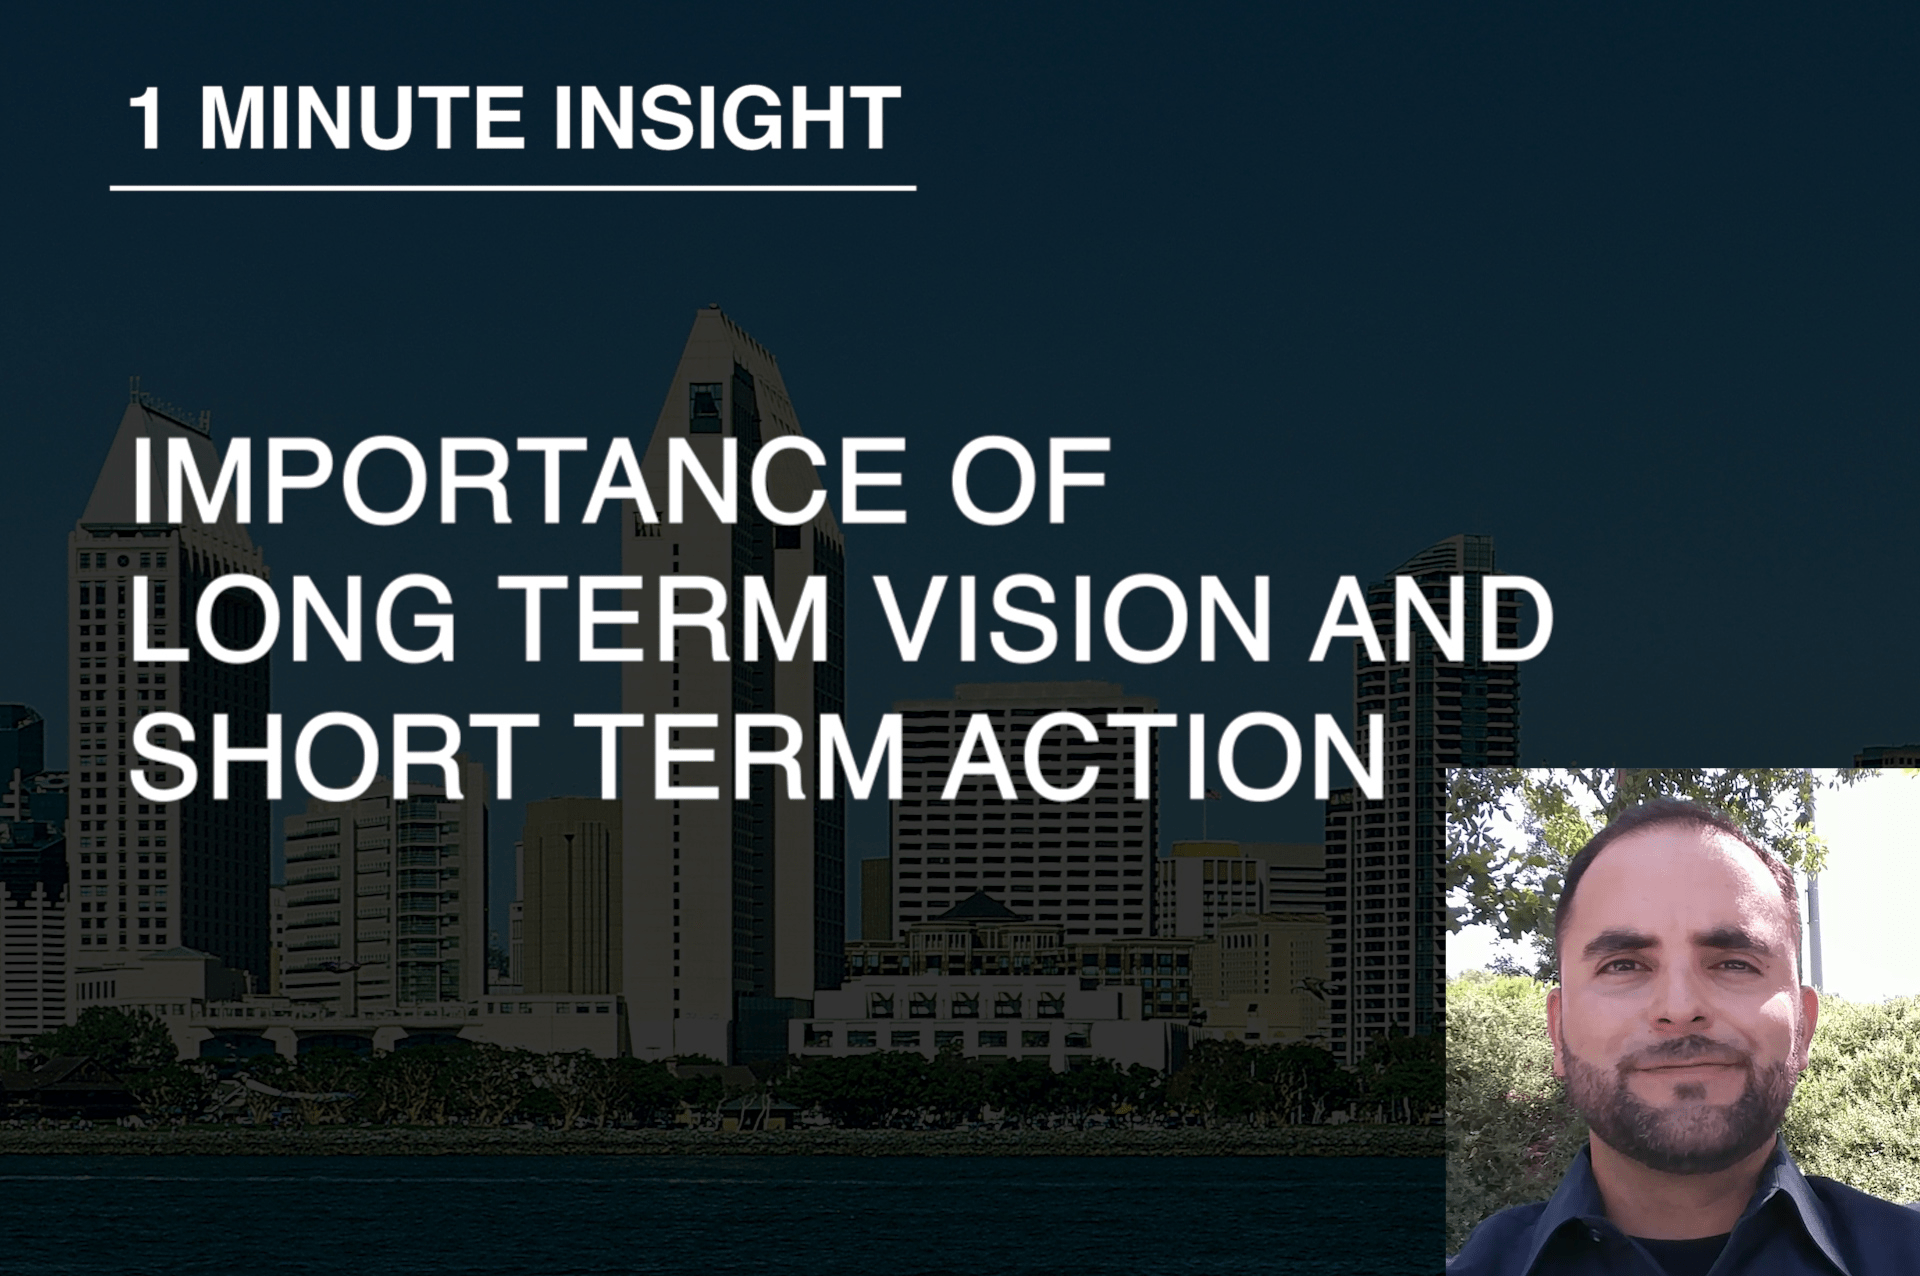 The Importance of Long Term Vision and Short Term Action